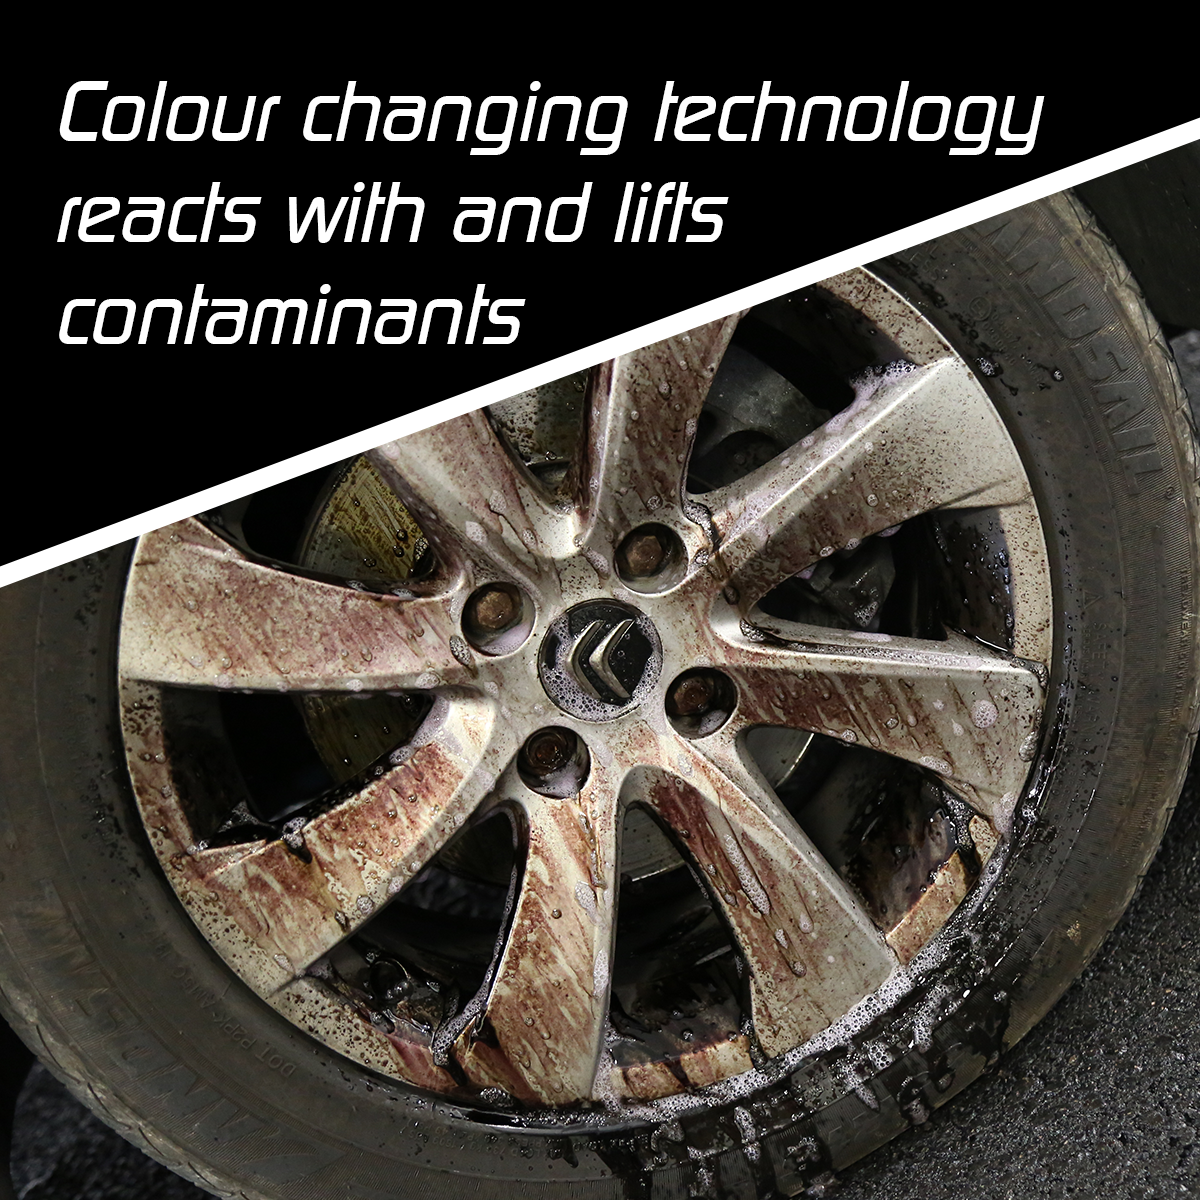 Colour changing technology reacts with and lifts contaminants